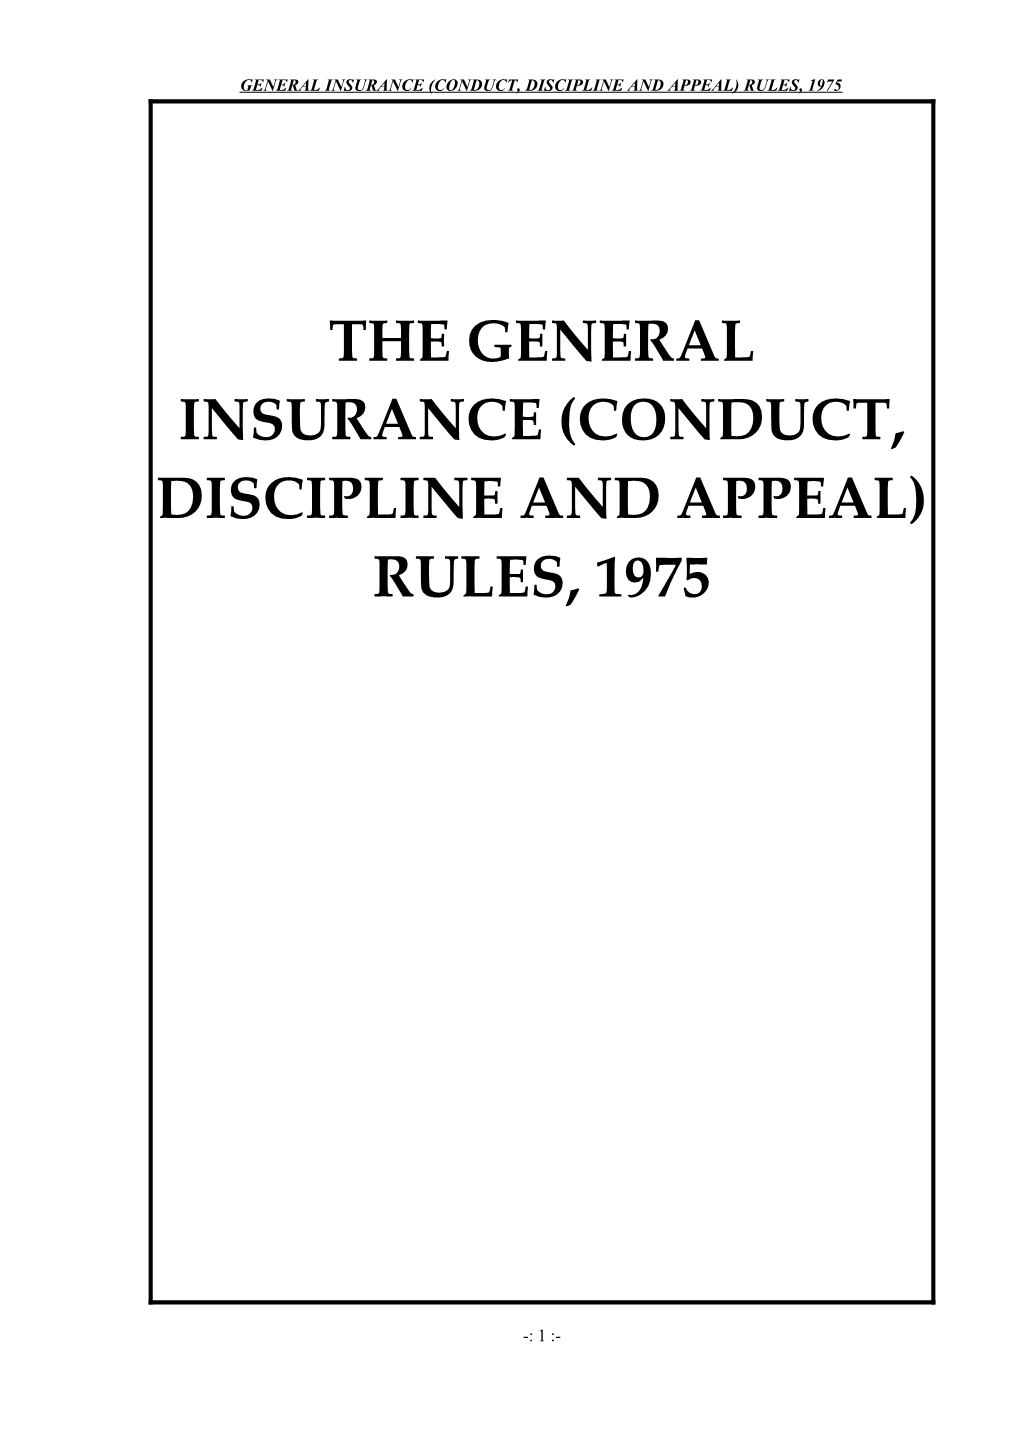 General Insurance (Conduct, Discipline & Appeal) Rules 1975